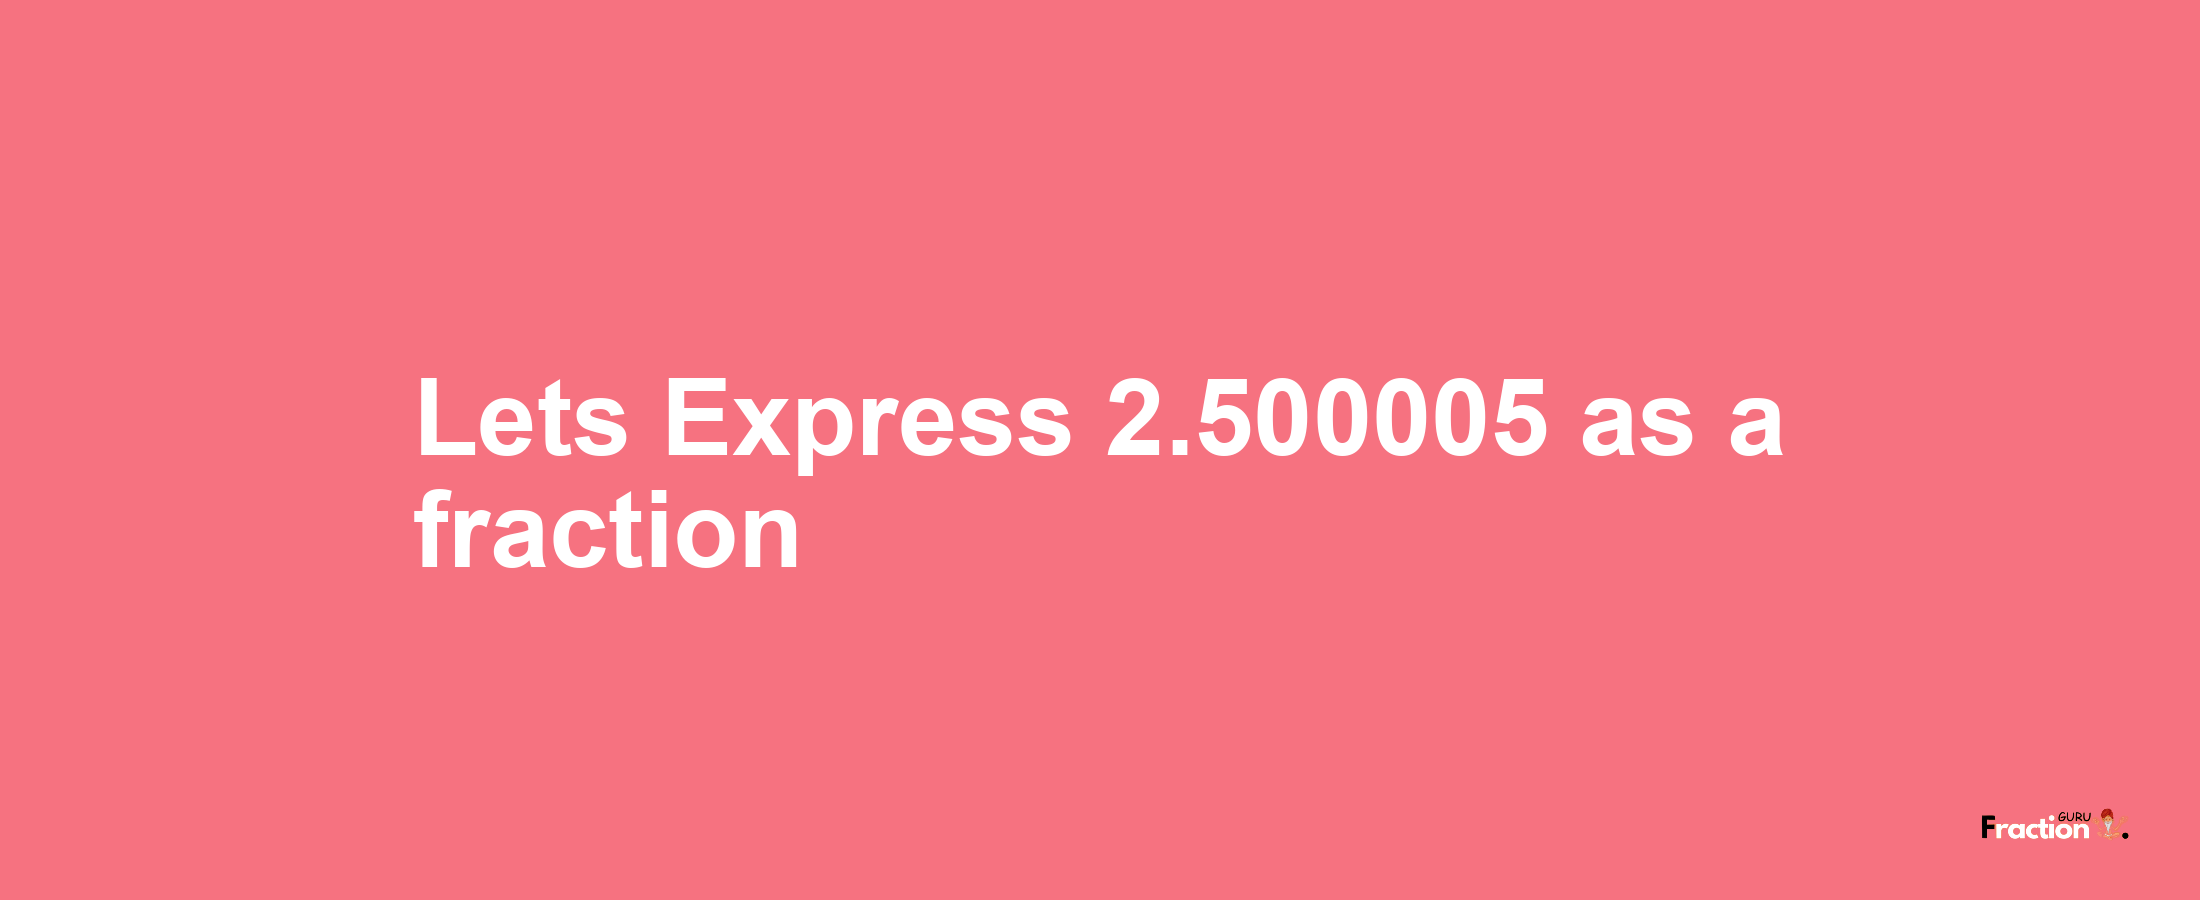 Lets Express 2.500005 as afraction